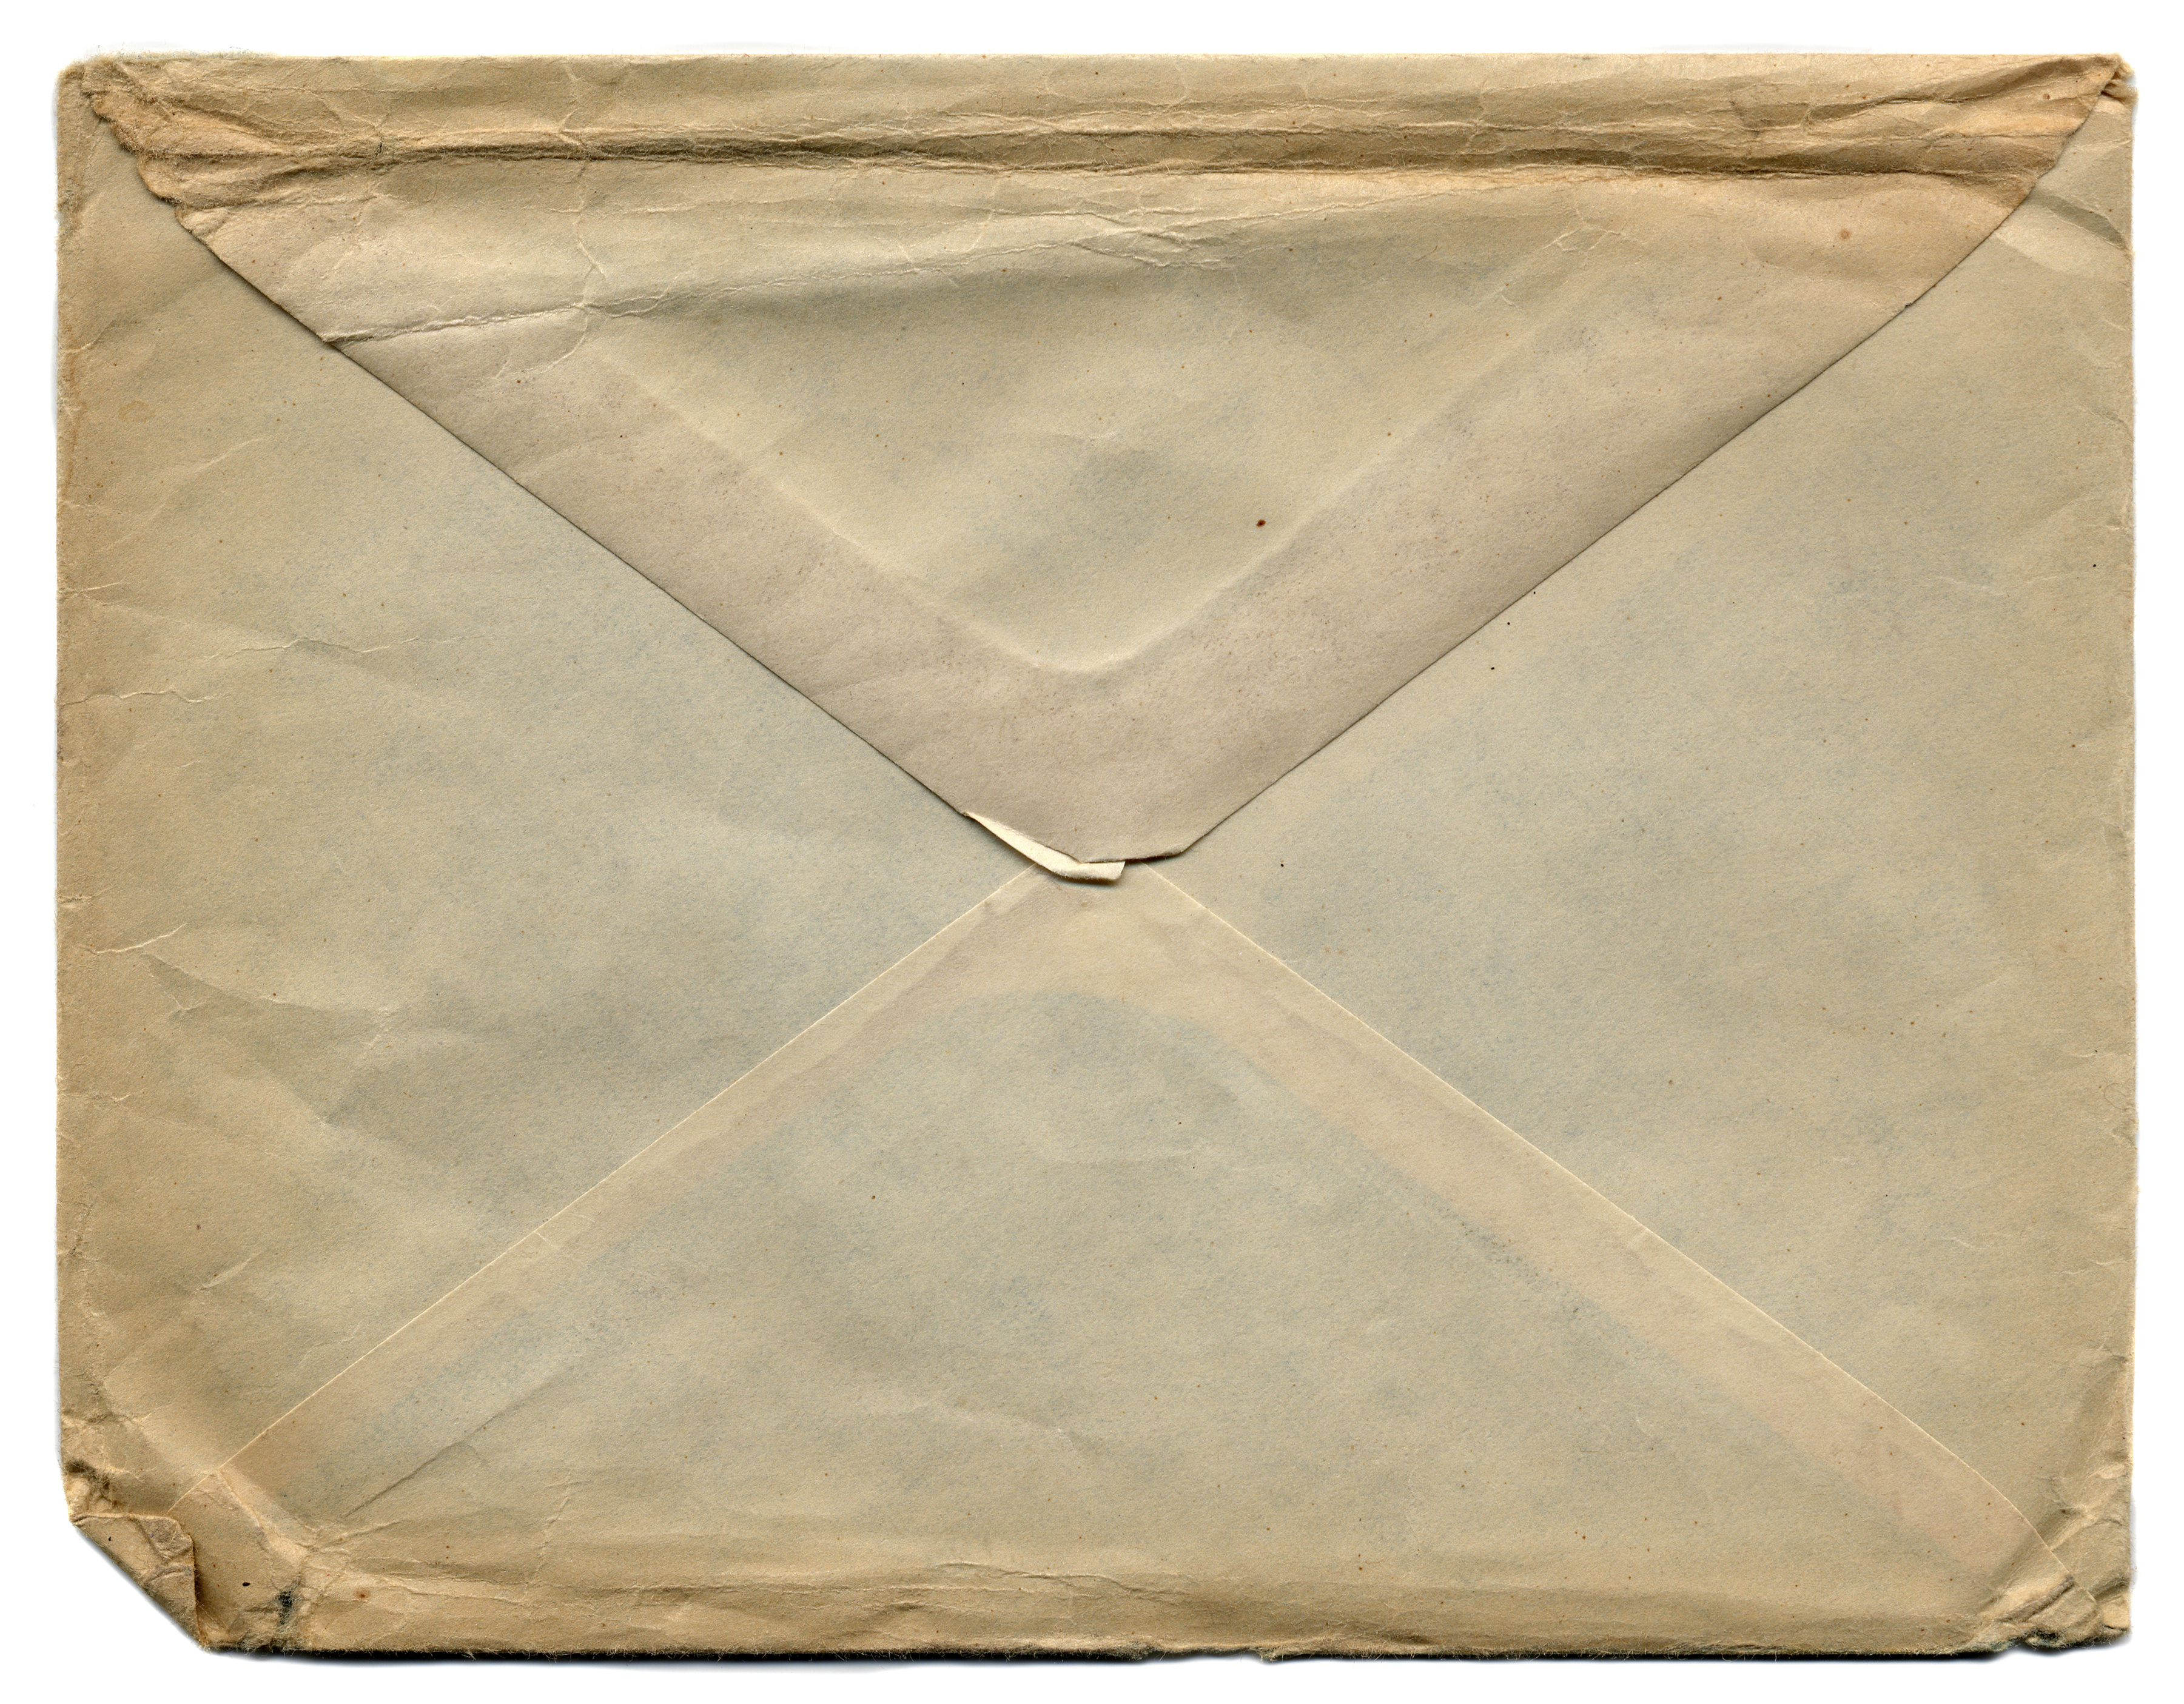 Vieille enveloppe | Source : Getty Images